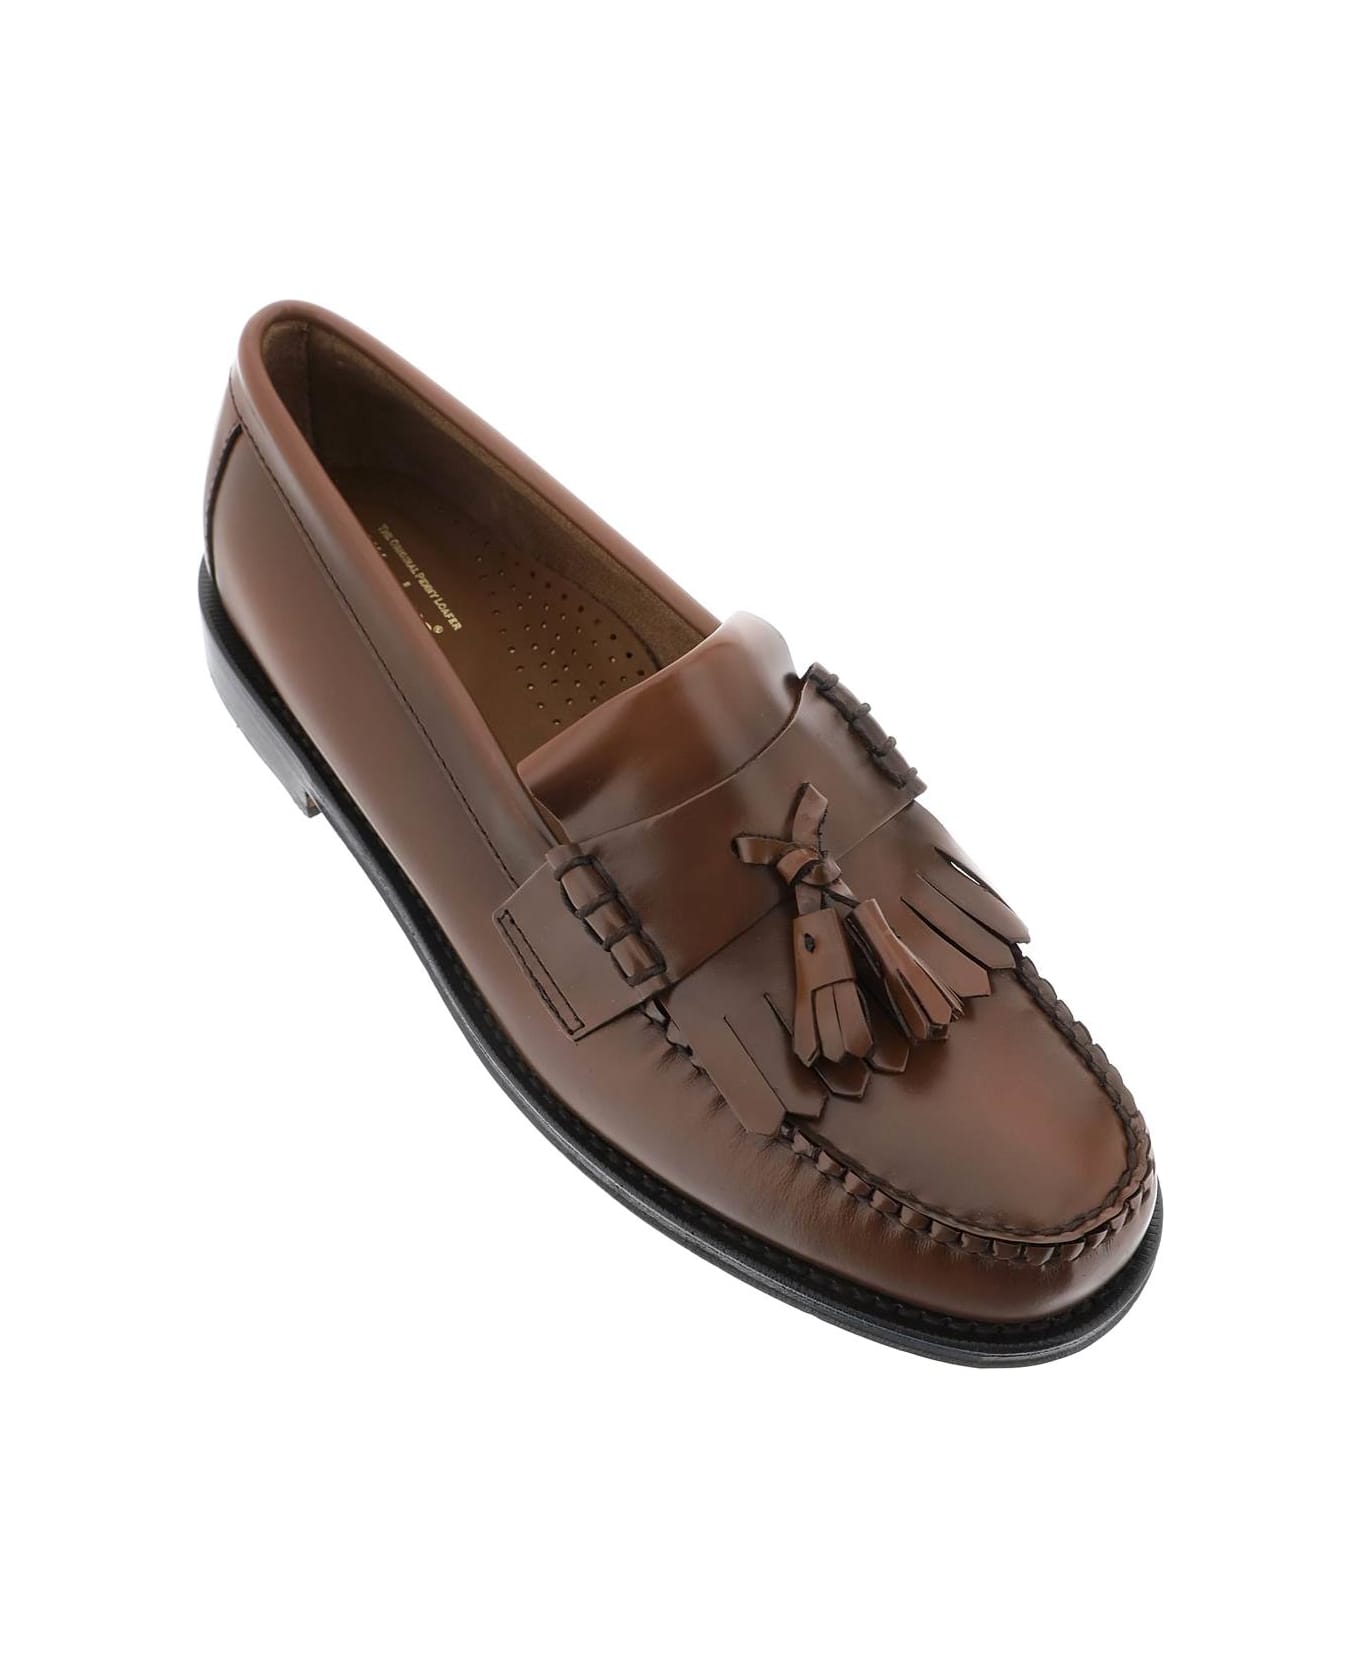 G.H.Bass & Co. Esther Kiltie Weejuns Loafers - MID BROWN (Brown)